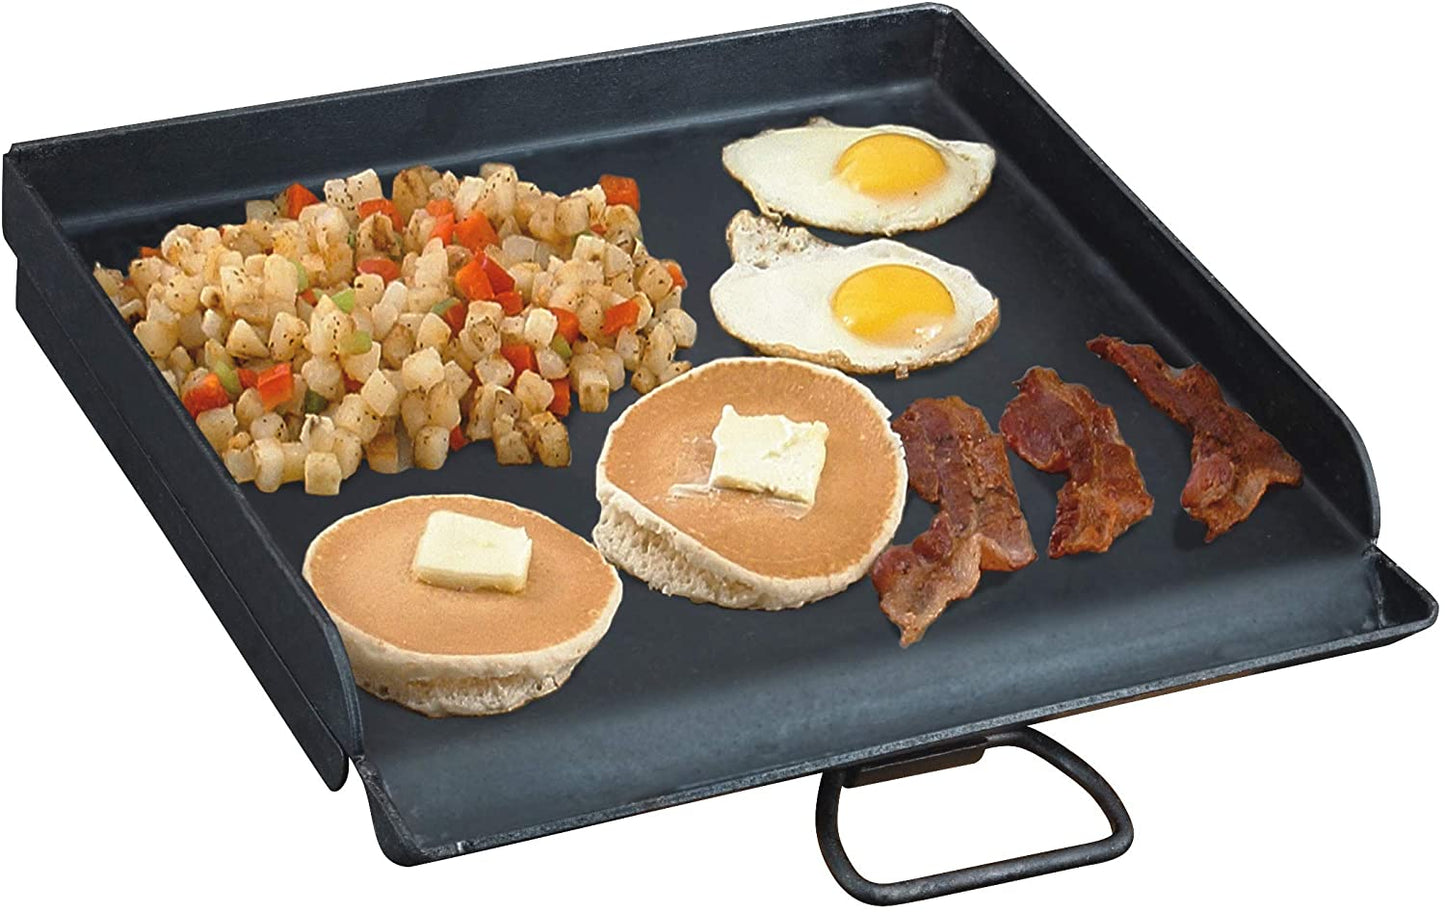 14" x 16" Professional Flat Top Griddle - SG30